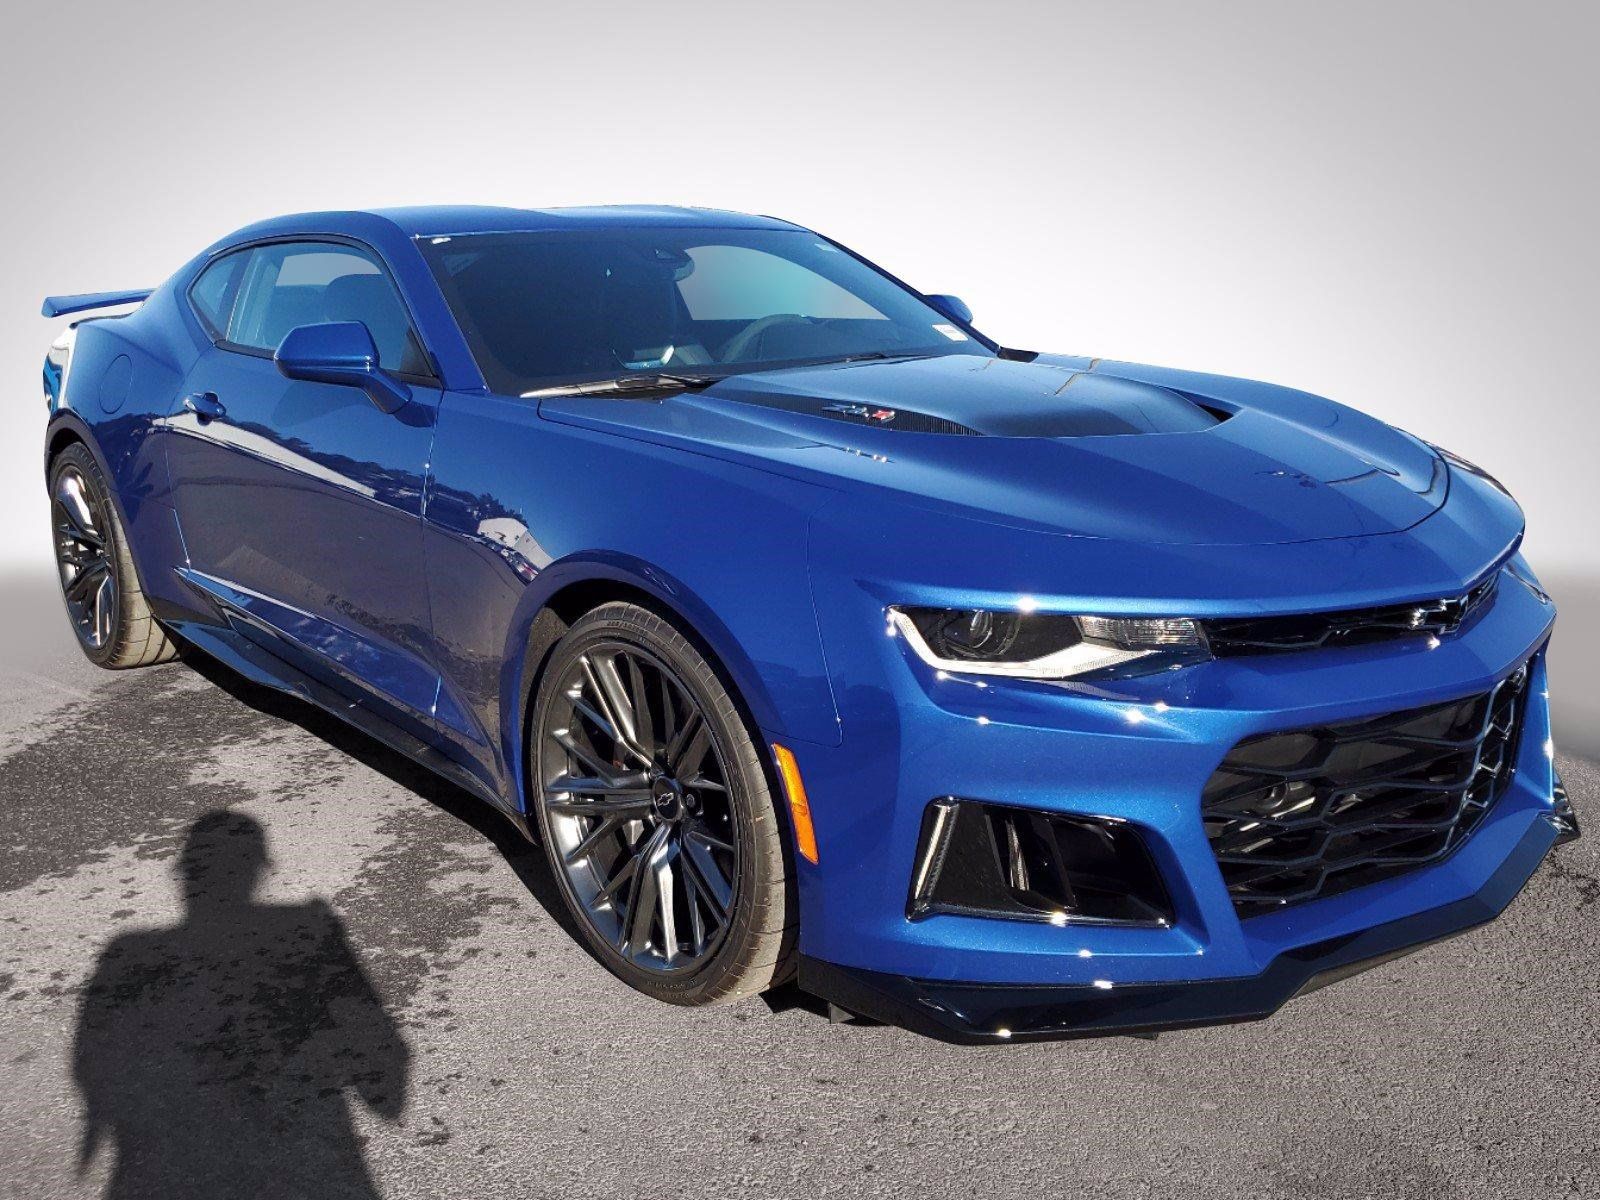 New 2021 Chevrolet Camaro ZL1 Coupe in Duluth #M02517. Rick Hendrick Chevrolet Duluth